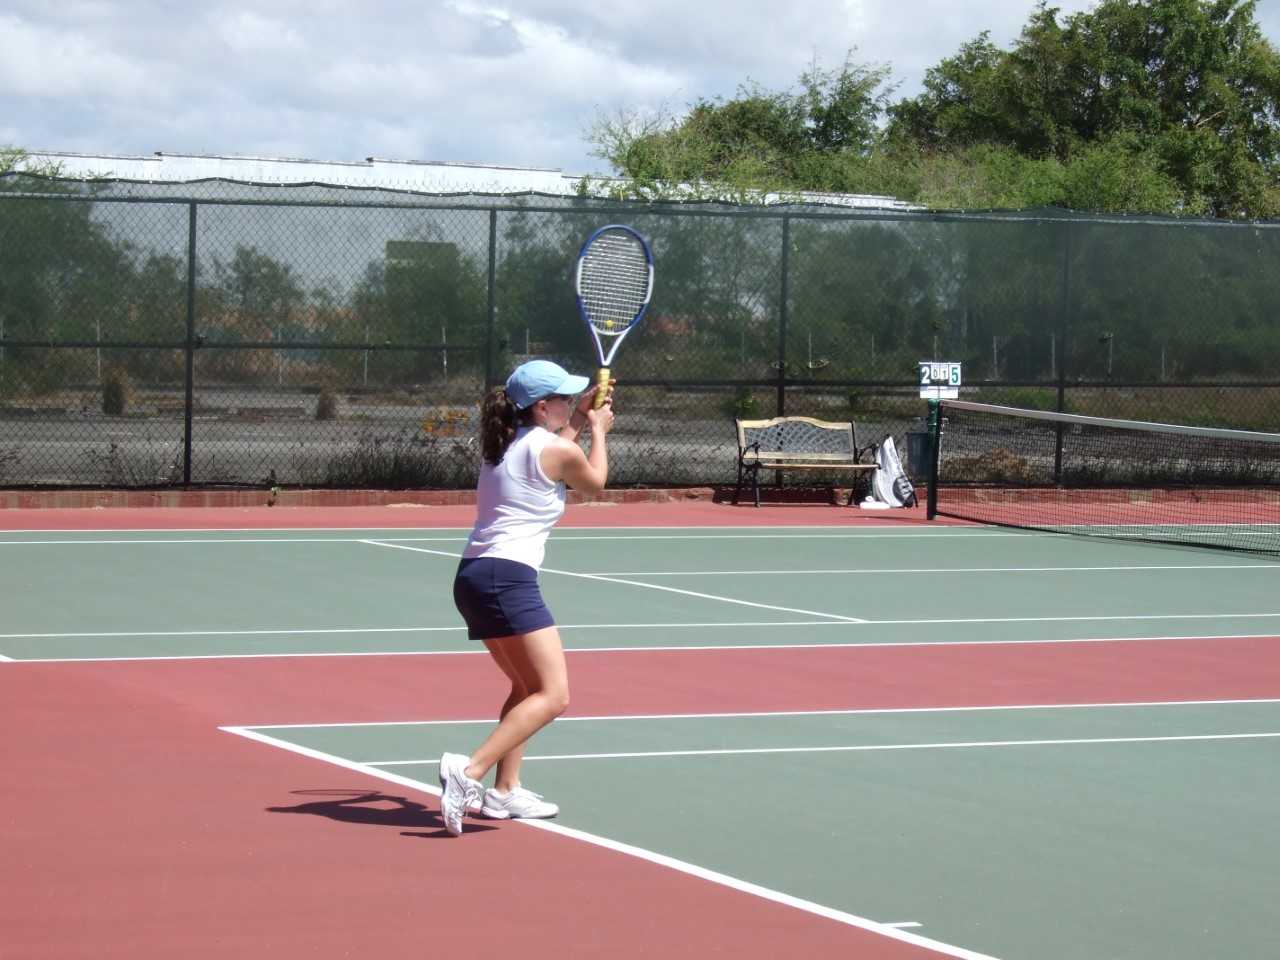 Sarah Morales grew up playing tennis in junior tournaments, and she was on her high school and college teams. Now, she plays on two Atlanta Lawn Tennis Association (ALTA) tennis leagues: women’s doubles and mixed doubles.